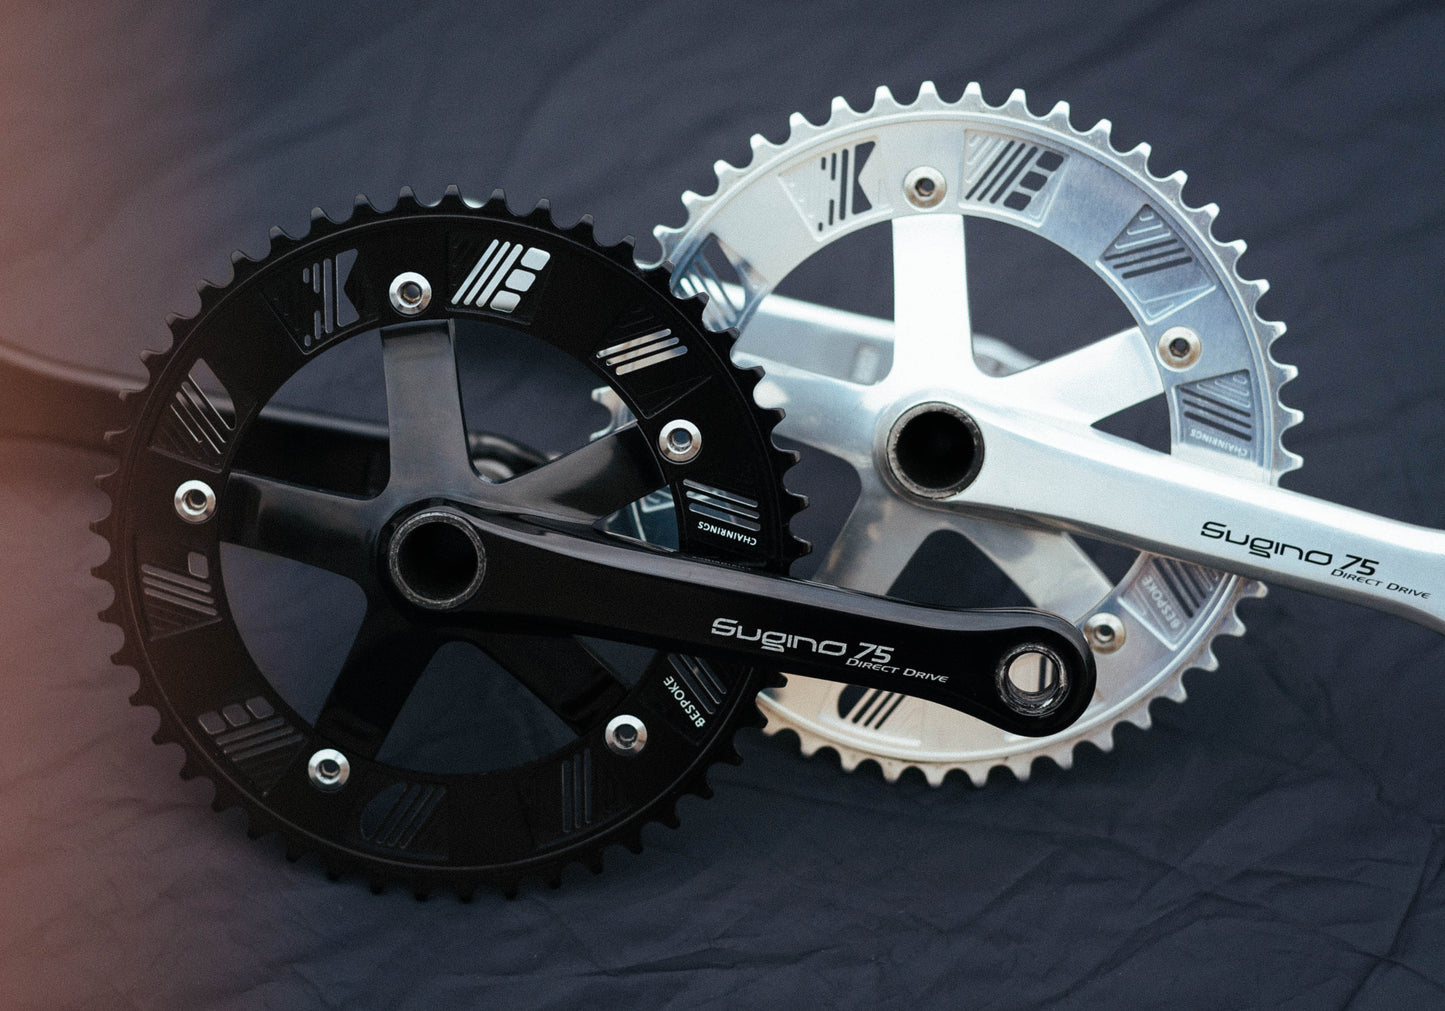 Deluxe Chainring